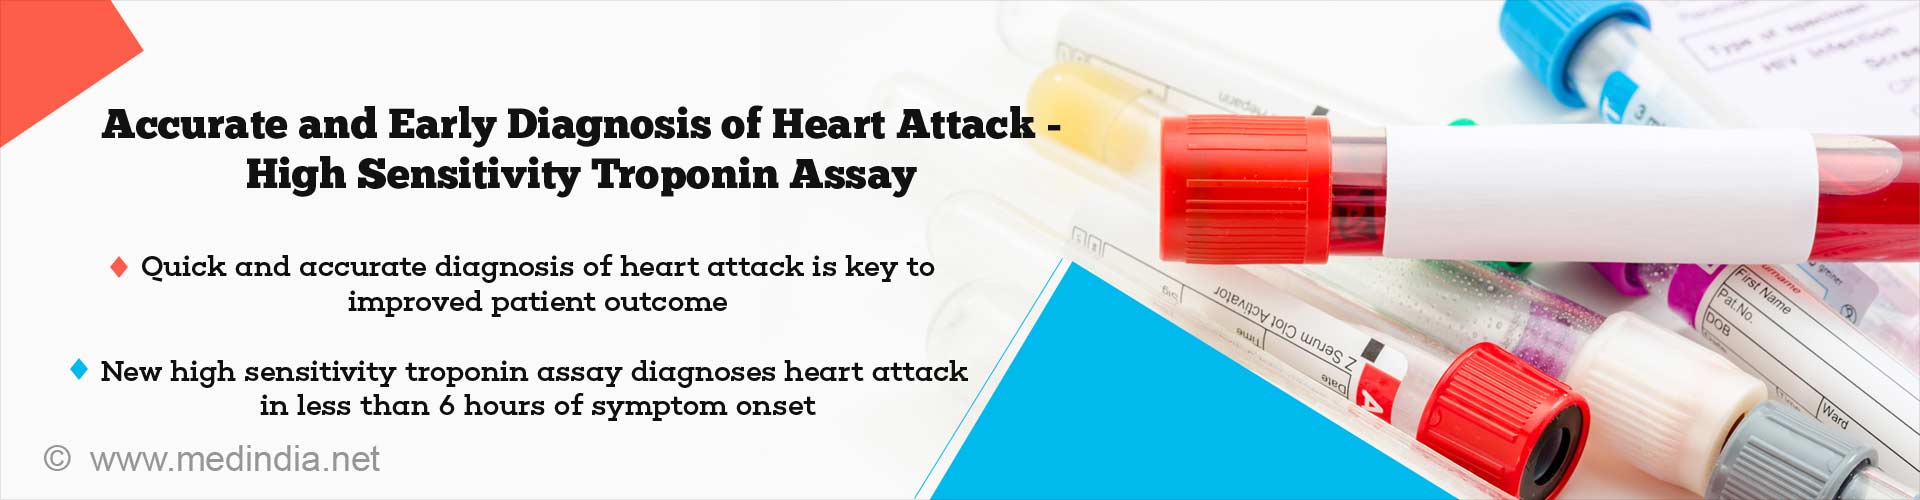 Accurate and early diagnosis of heart attack - High sensitivity troponin assay
- quick and accurate diagnosis of heart attack is key to improved patient outcome
- new high sensitivity troponin assay diagnoses heart attack in less than 6 hours of symptom onset